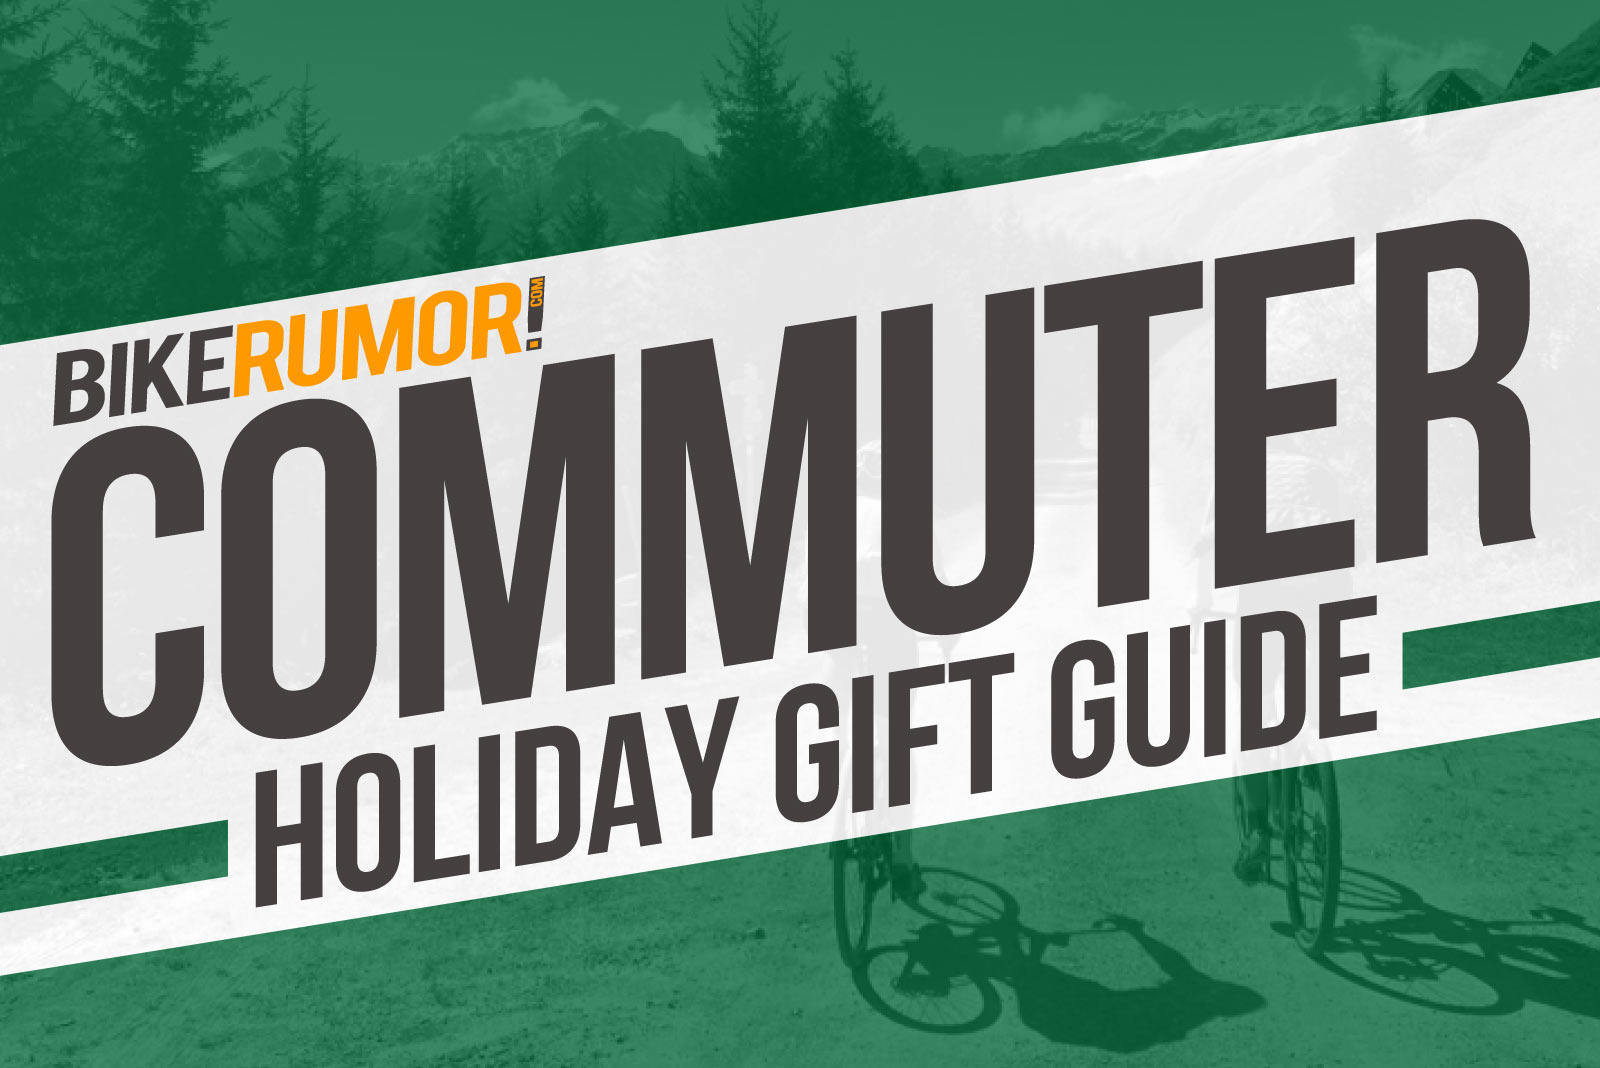 Holiday Gift Guide – The Best Gifts for Bike Commuters